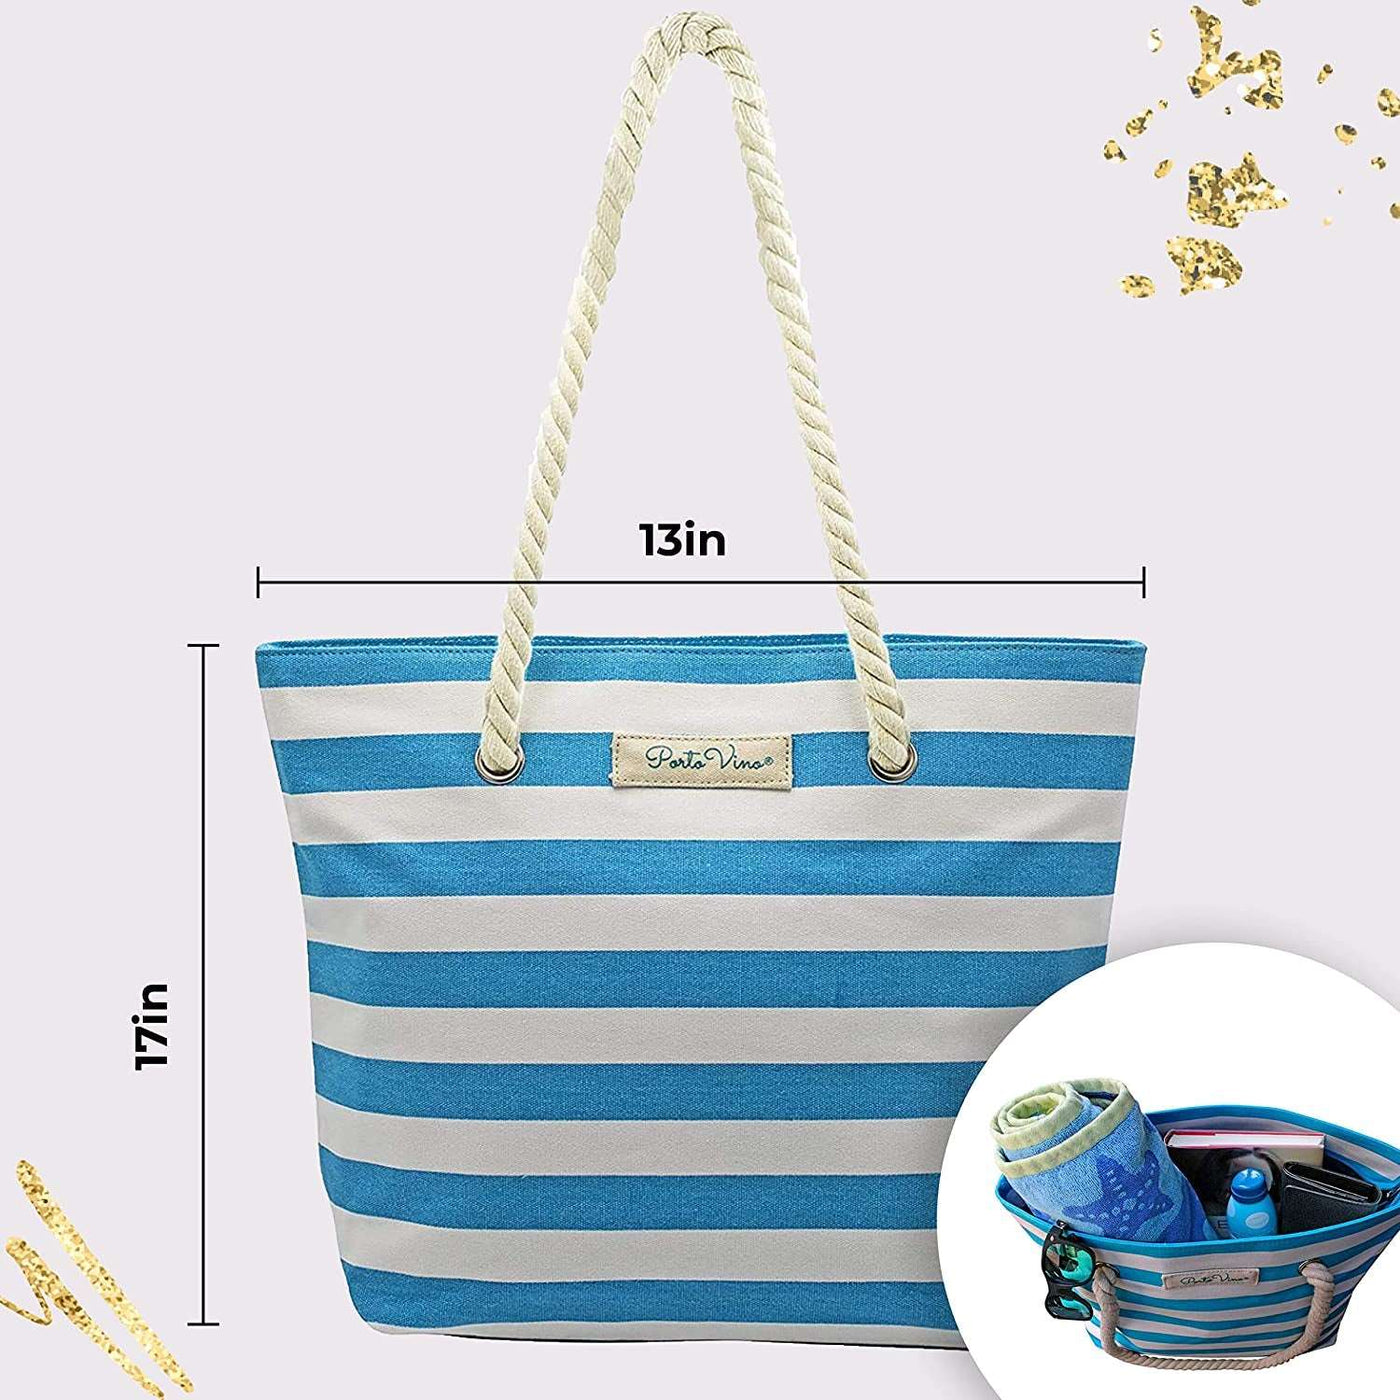 Tote Beach Bag - Canvas Drink Purse with Hidden Spout and Dispenser Flask for Drink Lovers That Holds and Pours 50Oz of a Beverage! Traveling, Concerts, Bachelorette Party - Turquoise/White